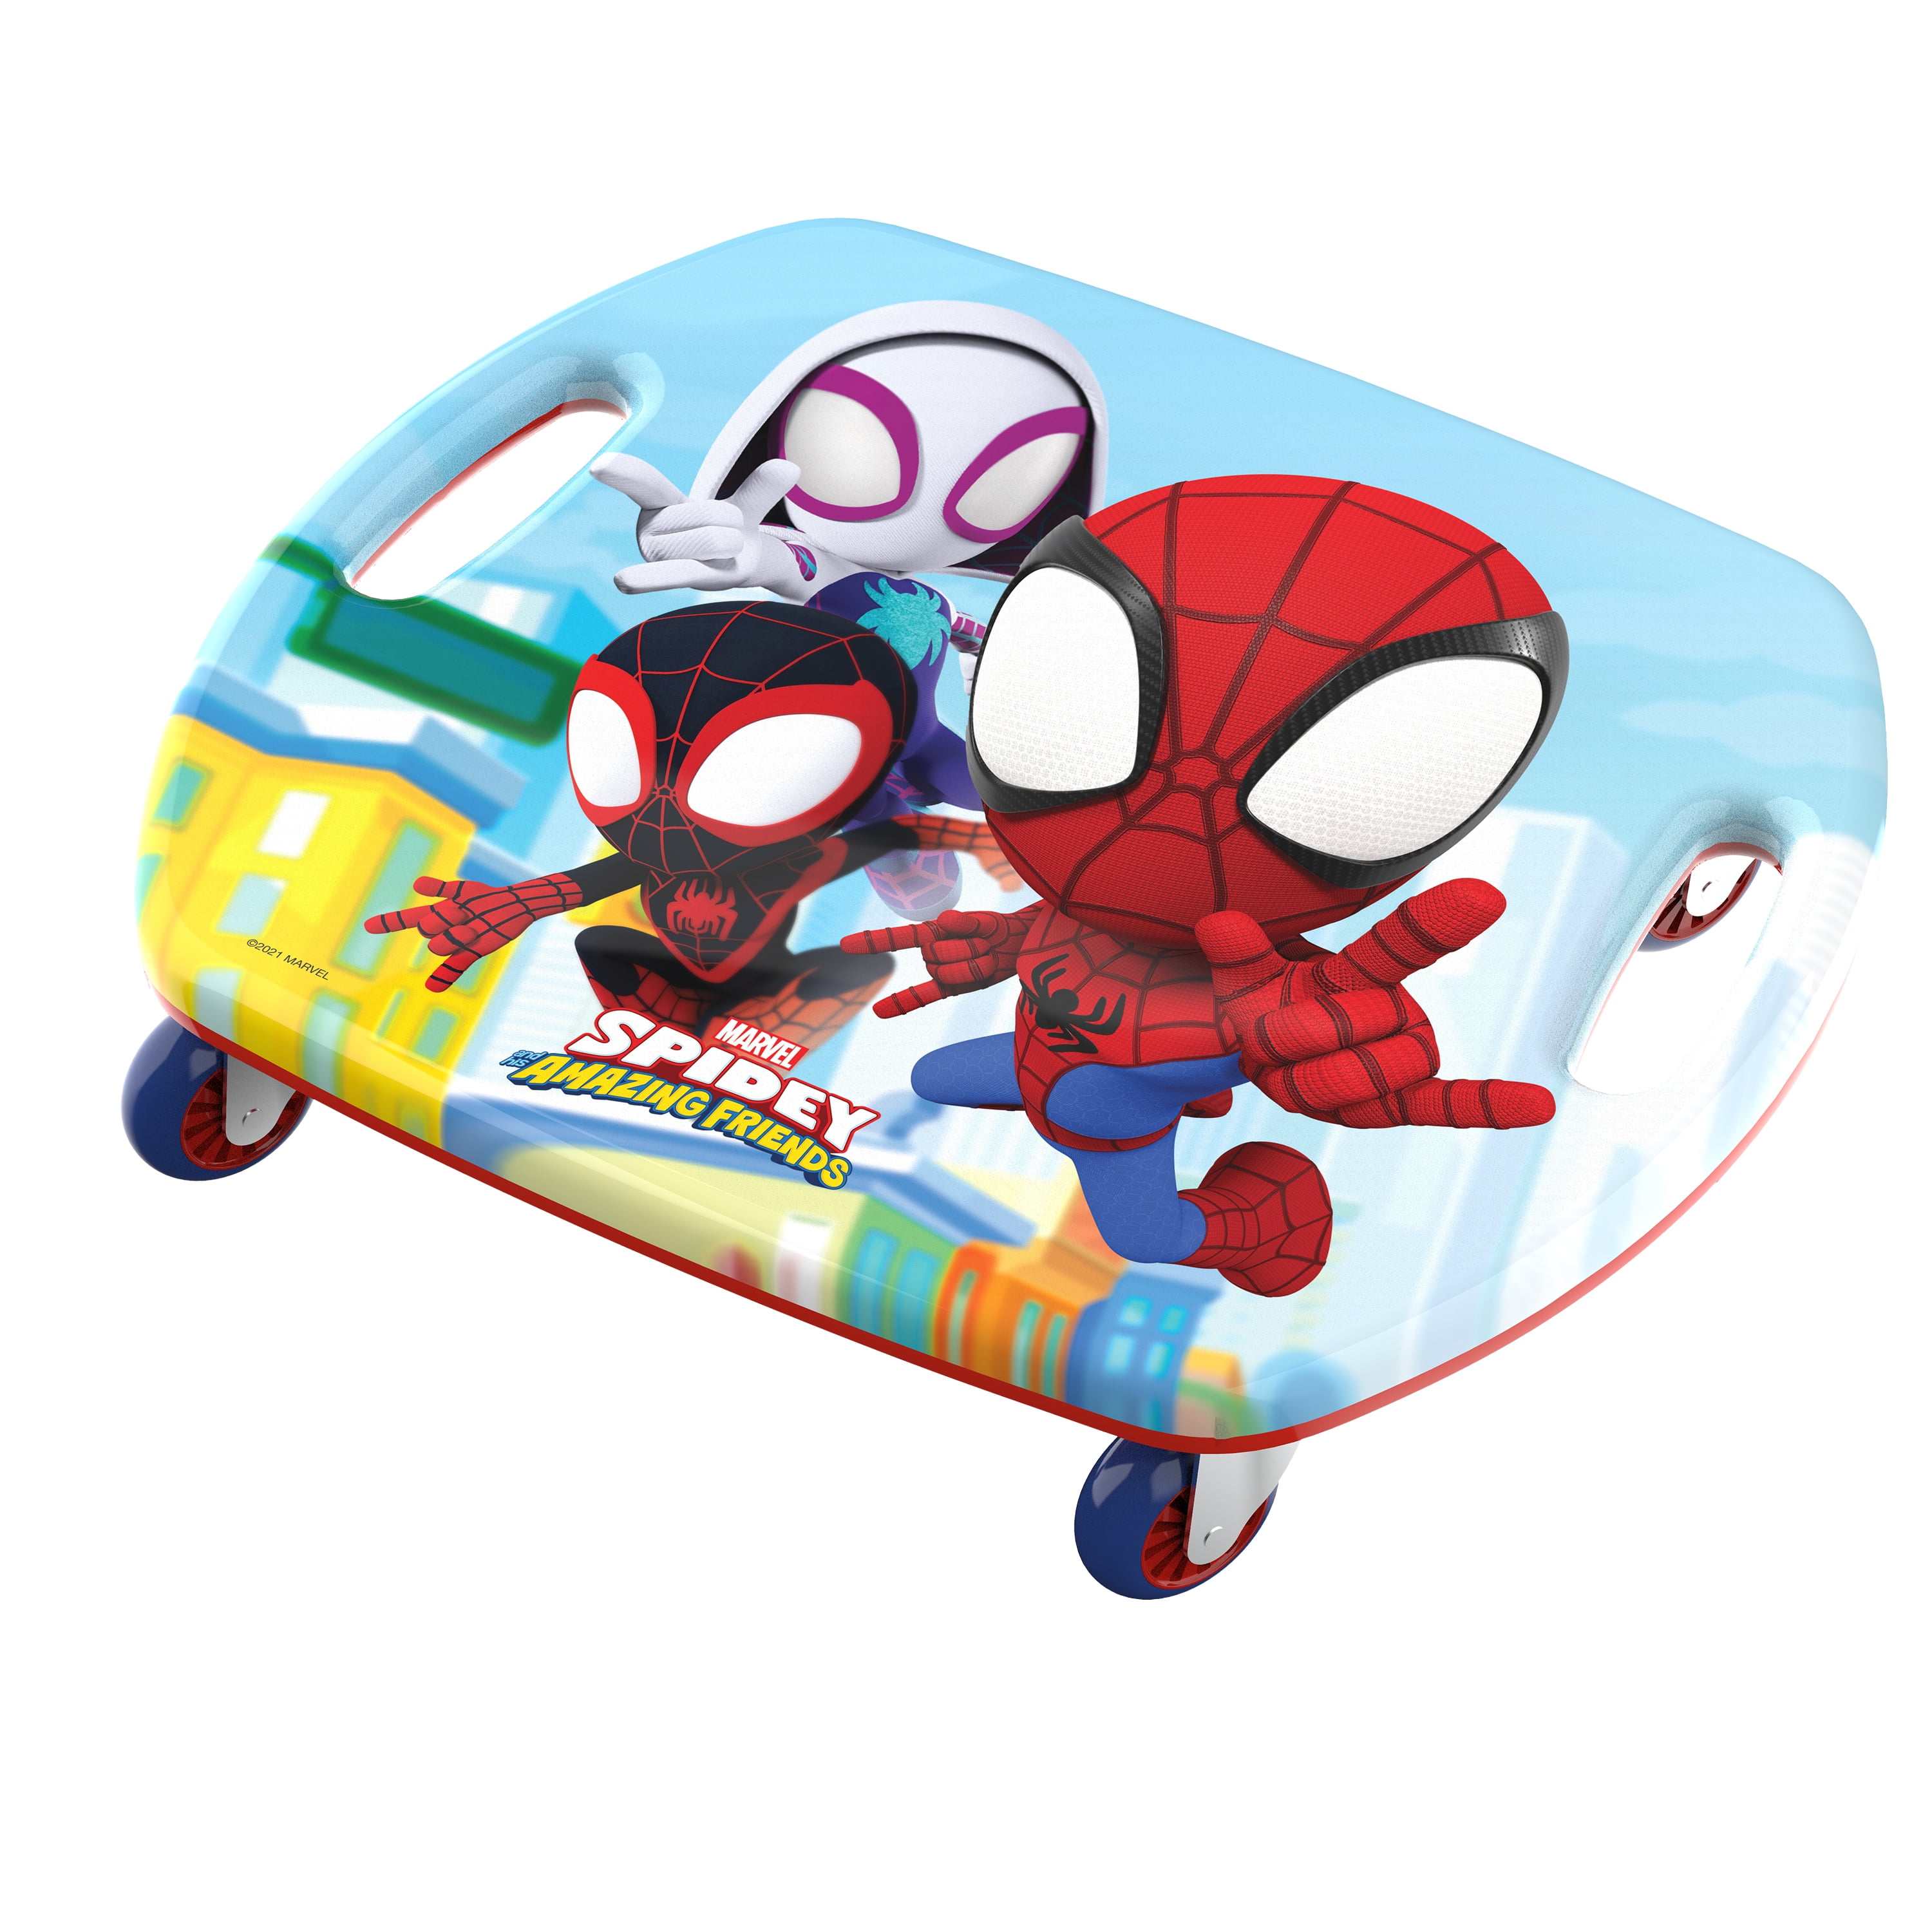 GOMO Spiderman Scoot Racer Unisex Ride-on Scoot Board for Kids 18 Months and up